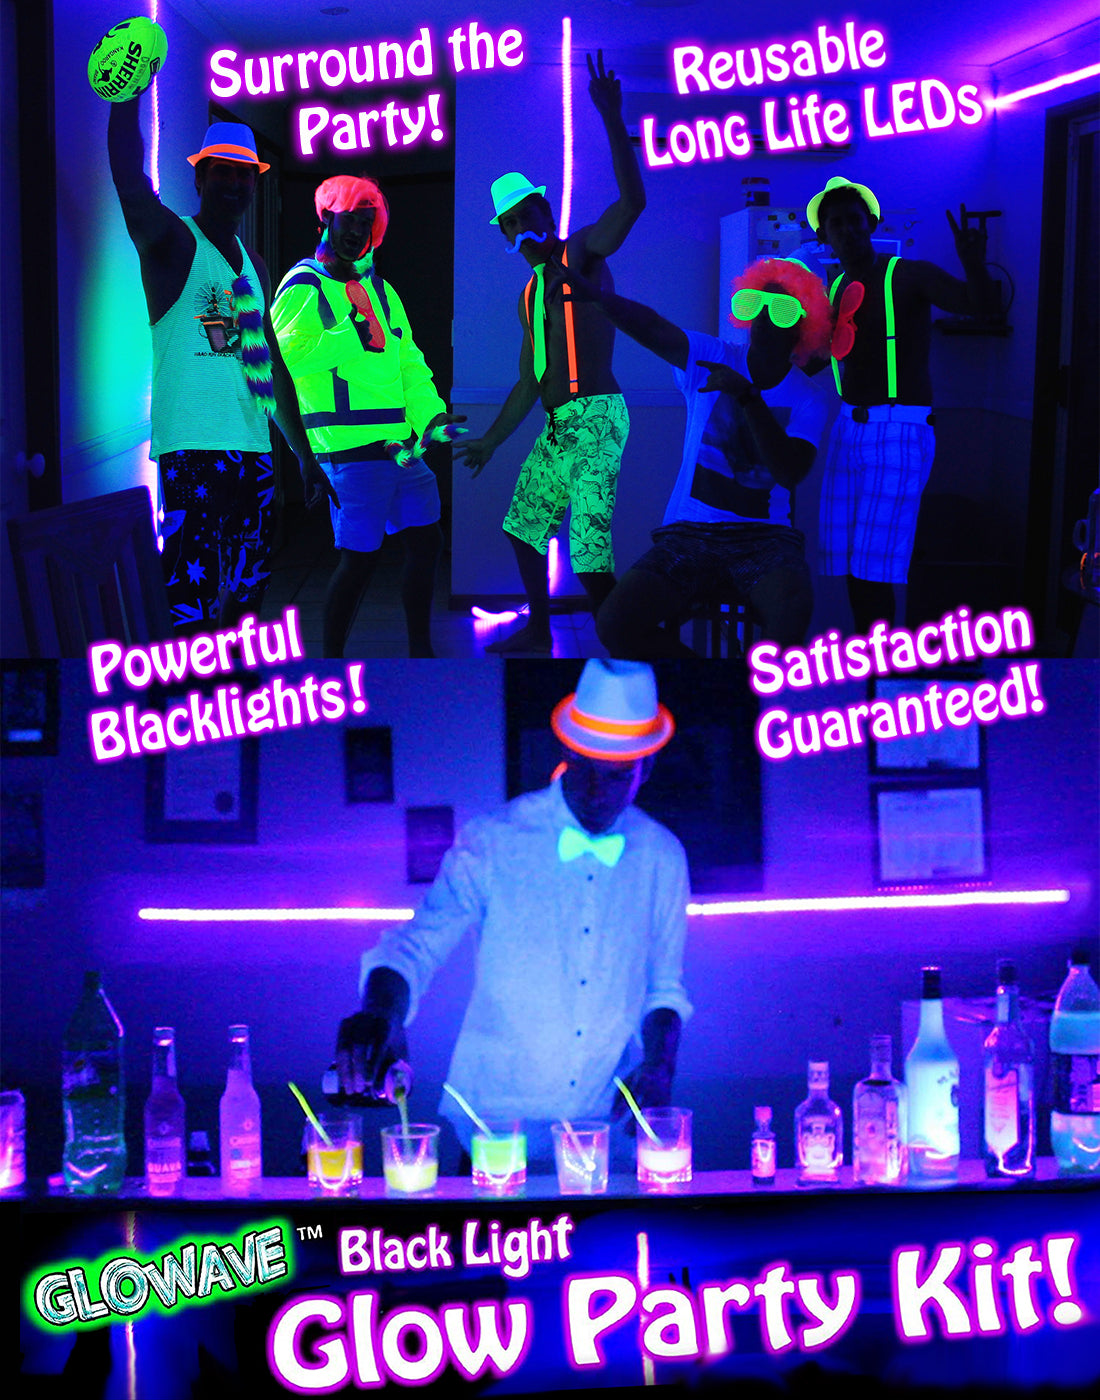 nok lejlighed perforere Black Light Glow Party Kit GLOWAVE! For epic glow in the dark parties!